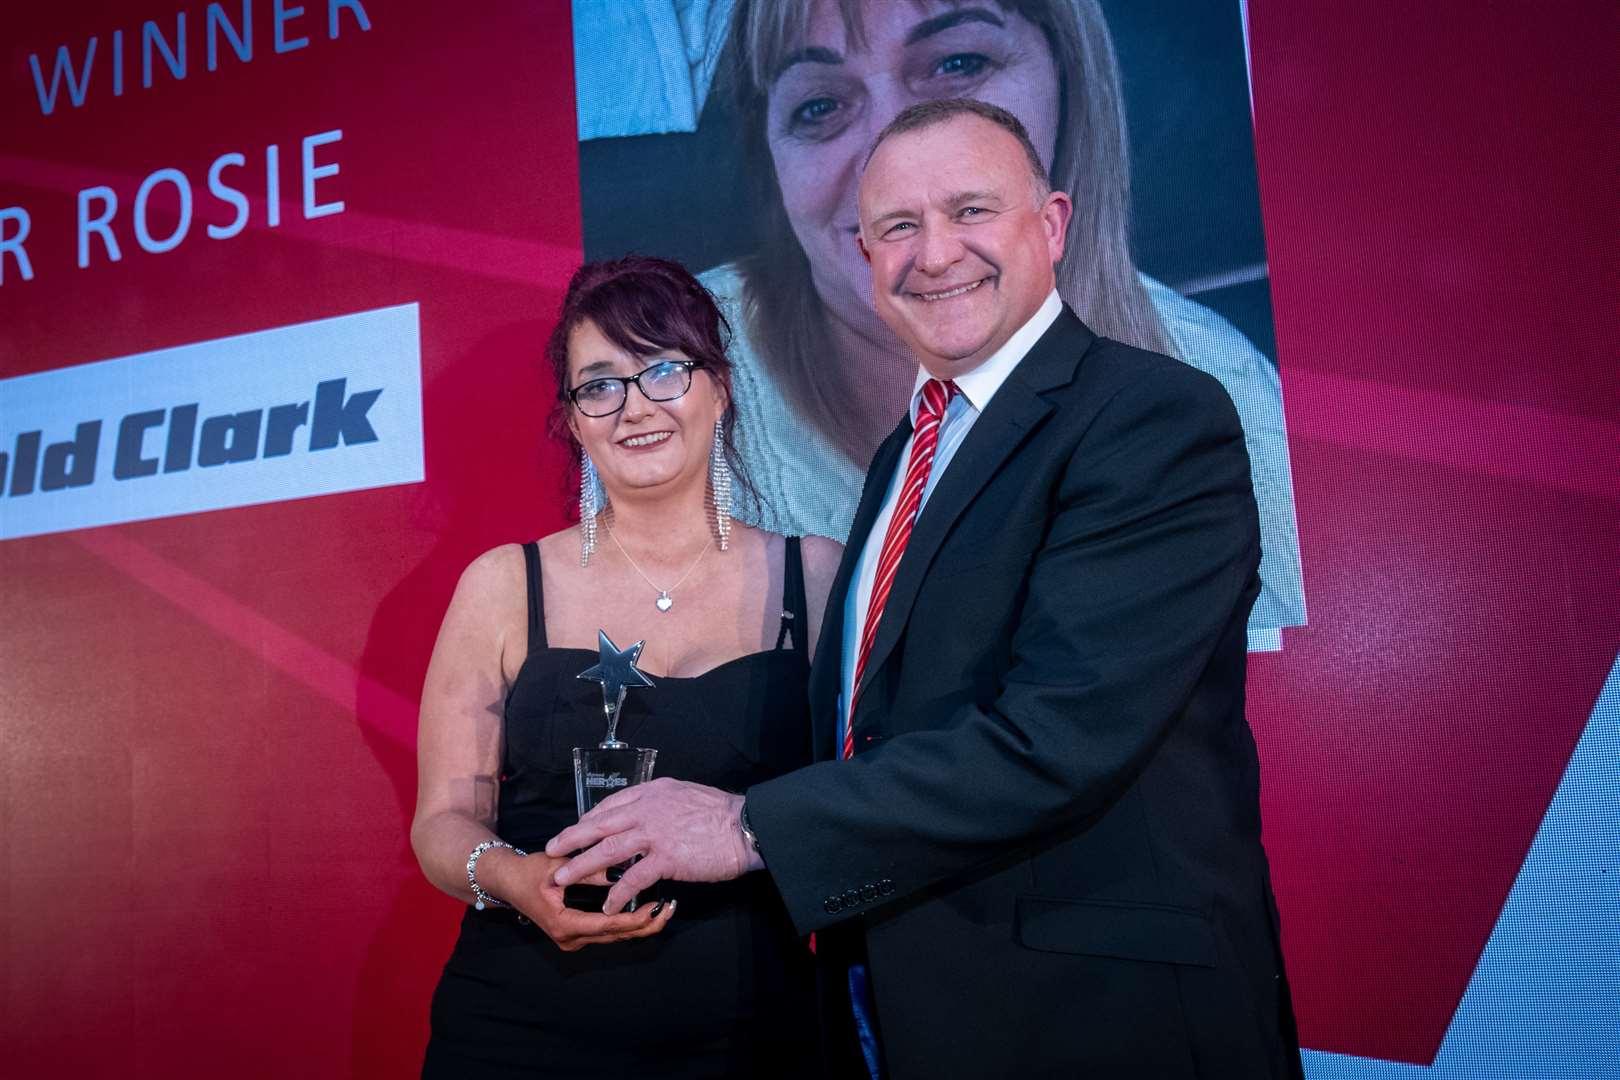 MP Drew Hendry with Clare Fraser who accepted the fundraiser of the year award on behalf of her mum Heather Rosie.